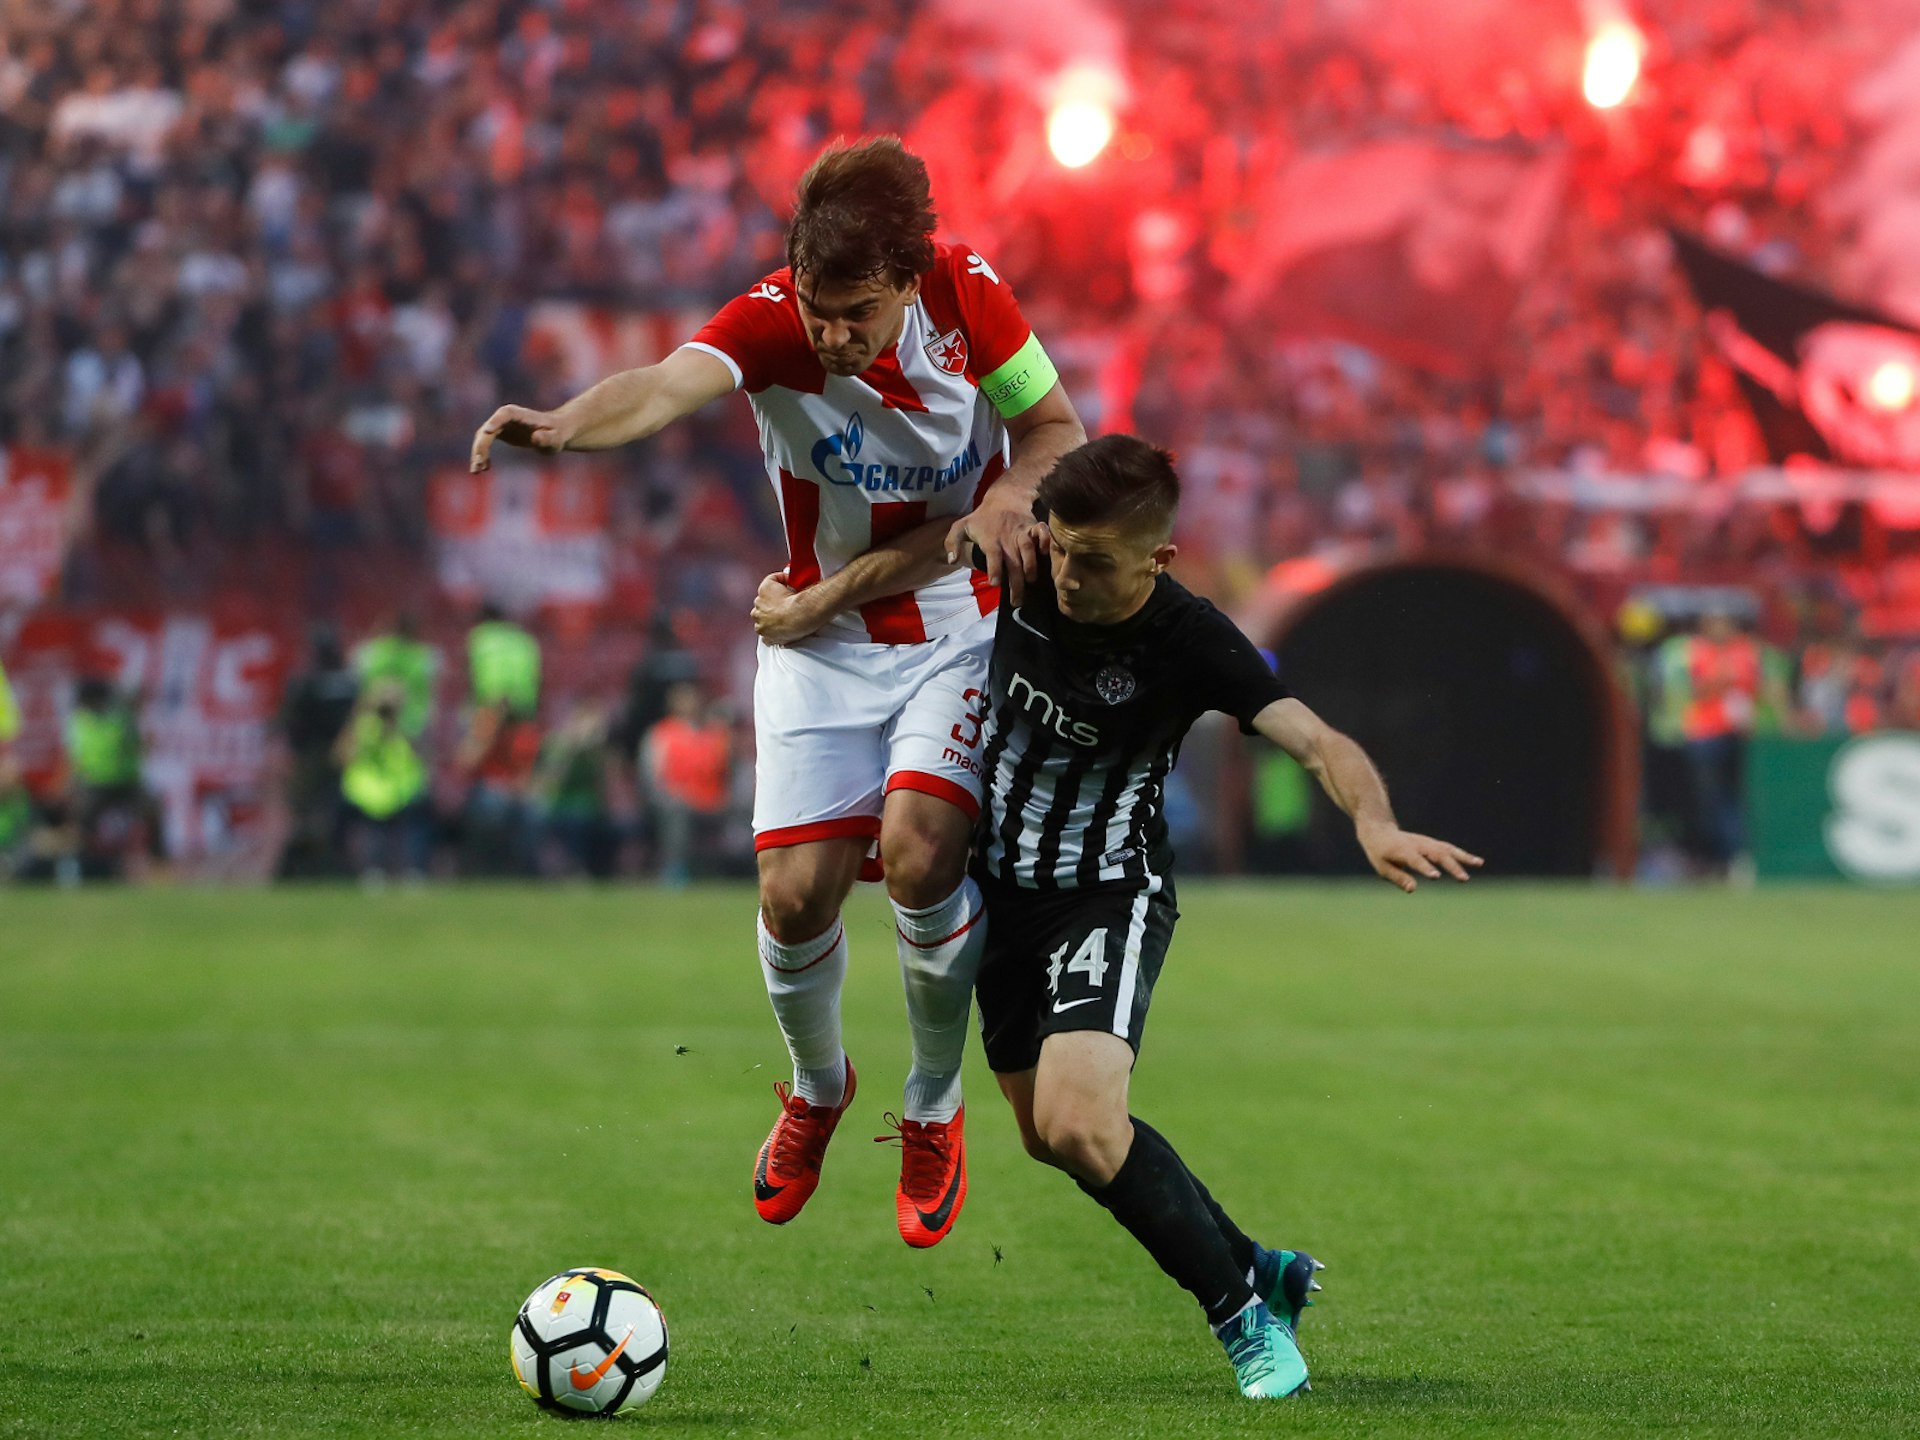 Two football players compete for the ball during a football match at Marakana stadium in Belgrade